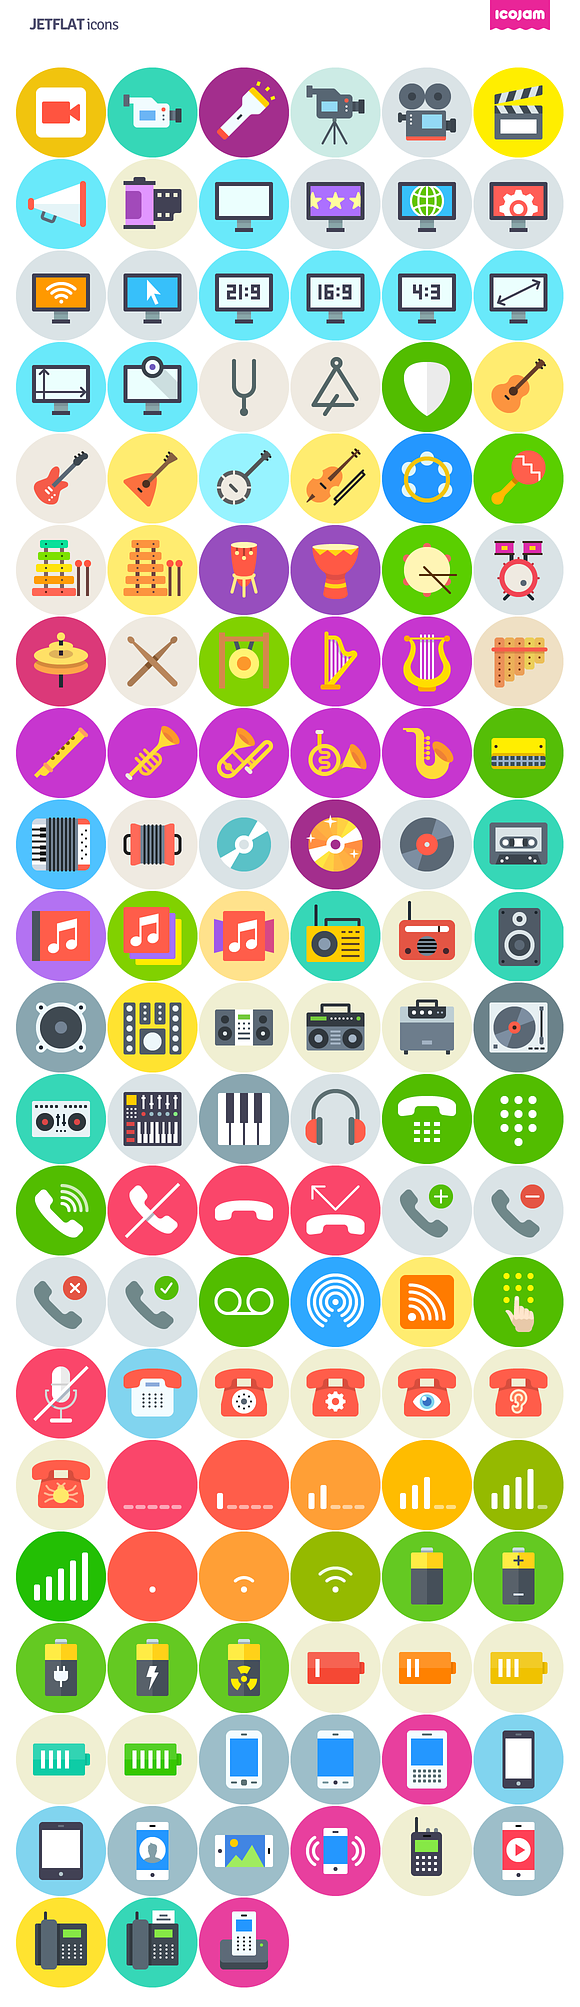 750 JetFlat icons in Infographic Icons - product preview 1